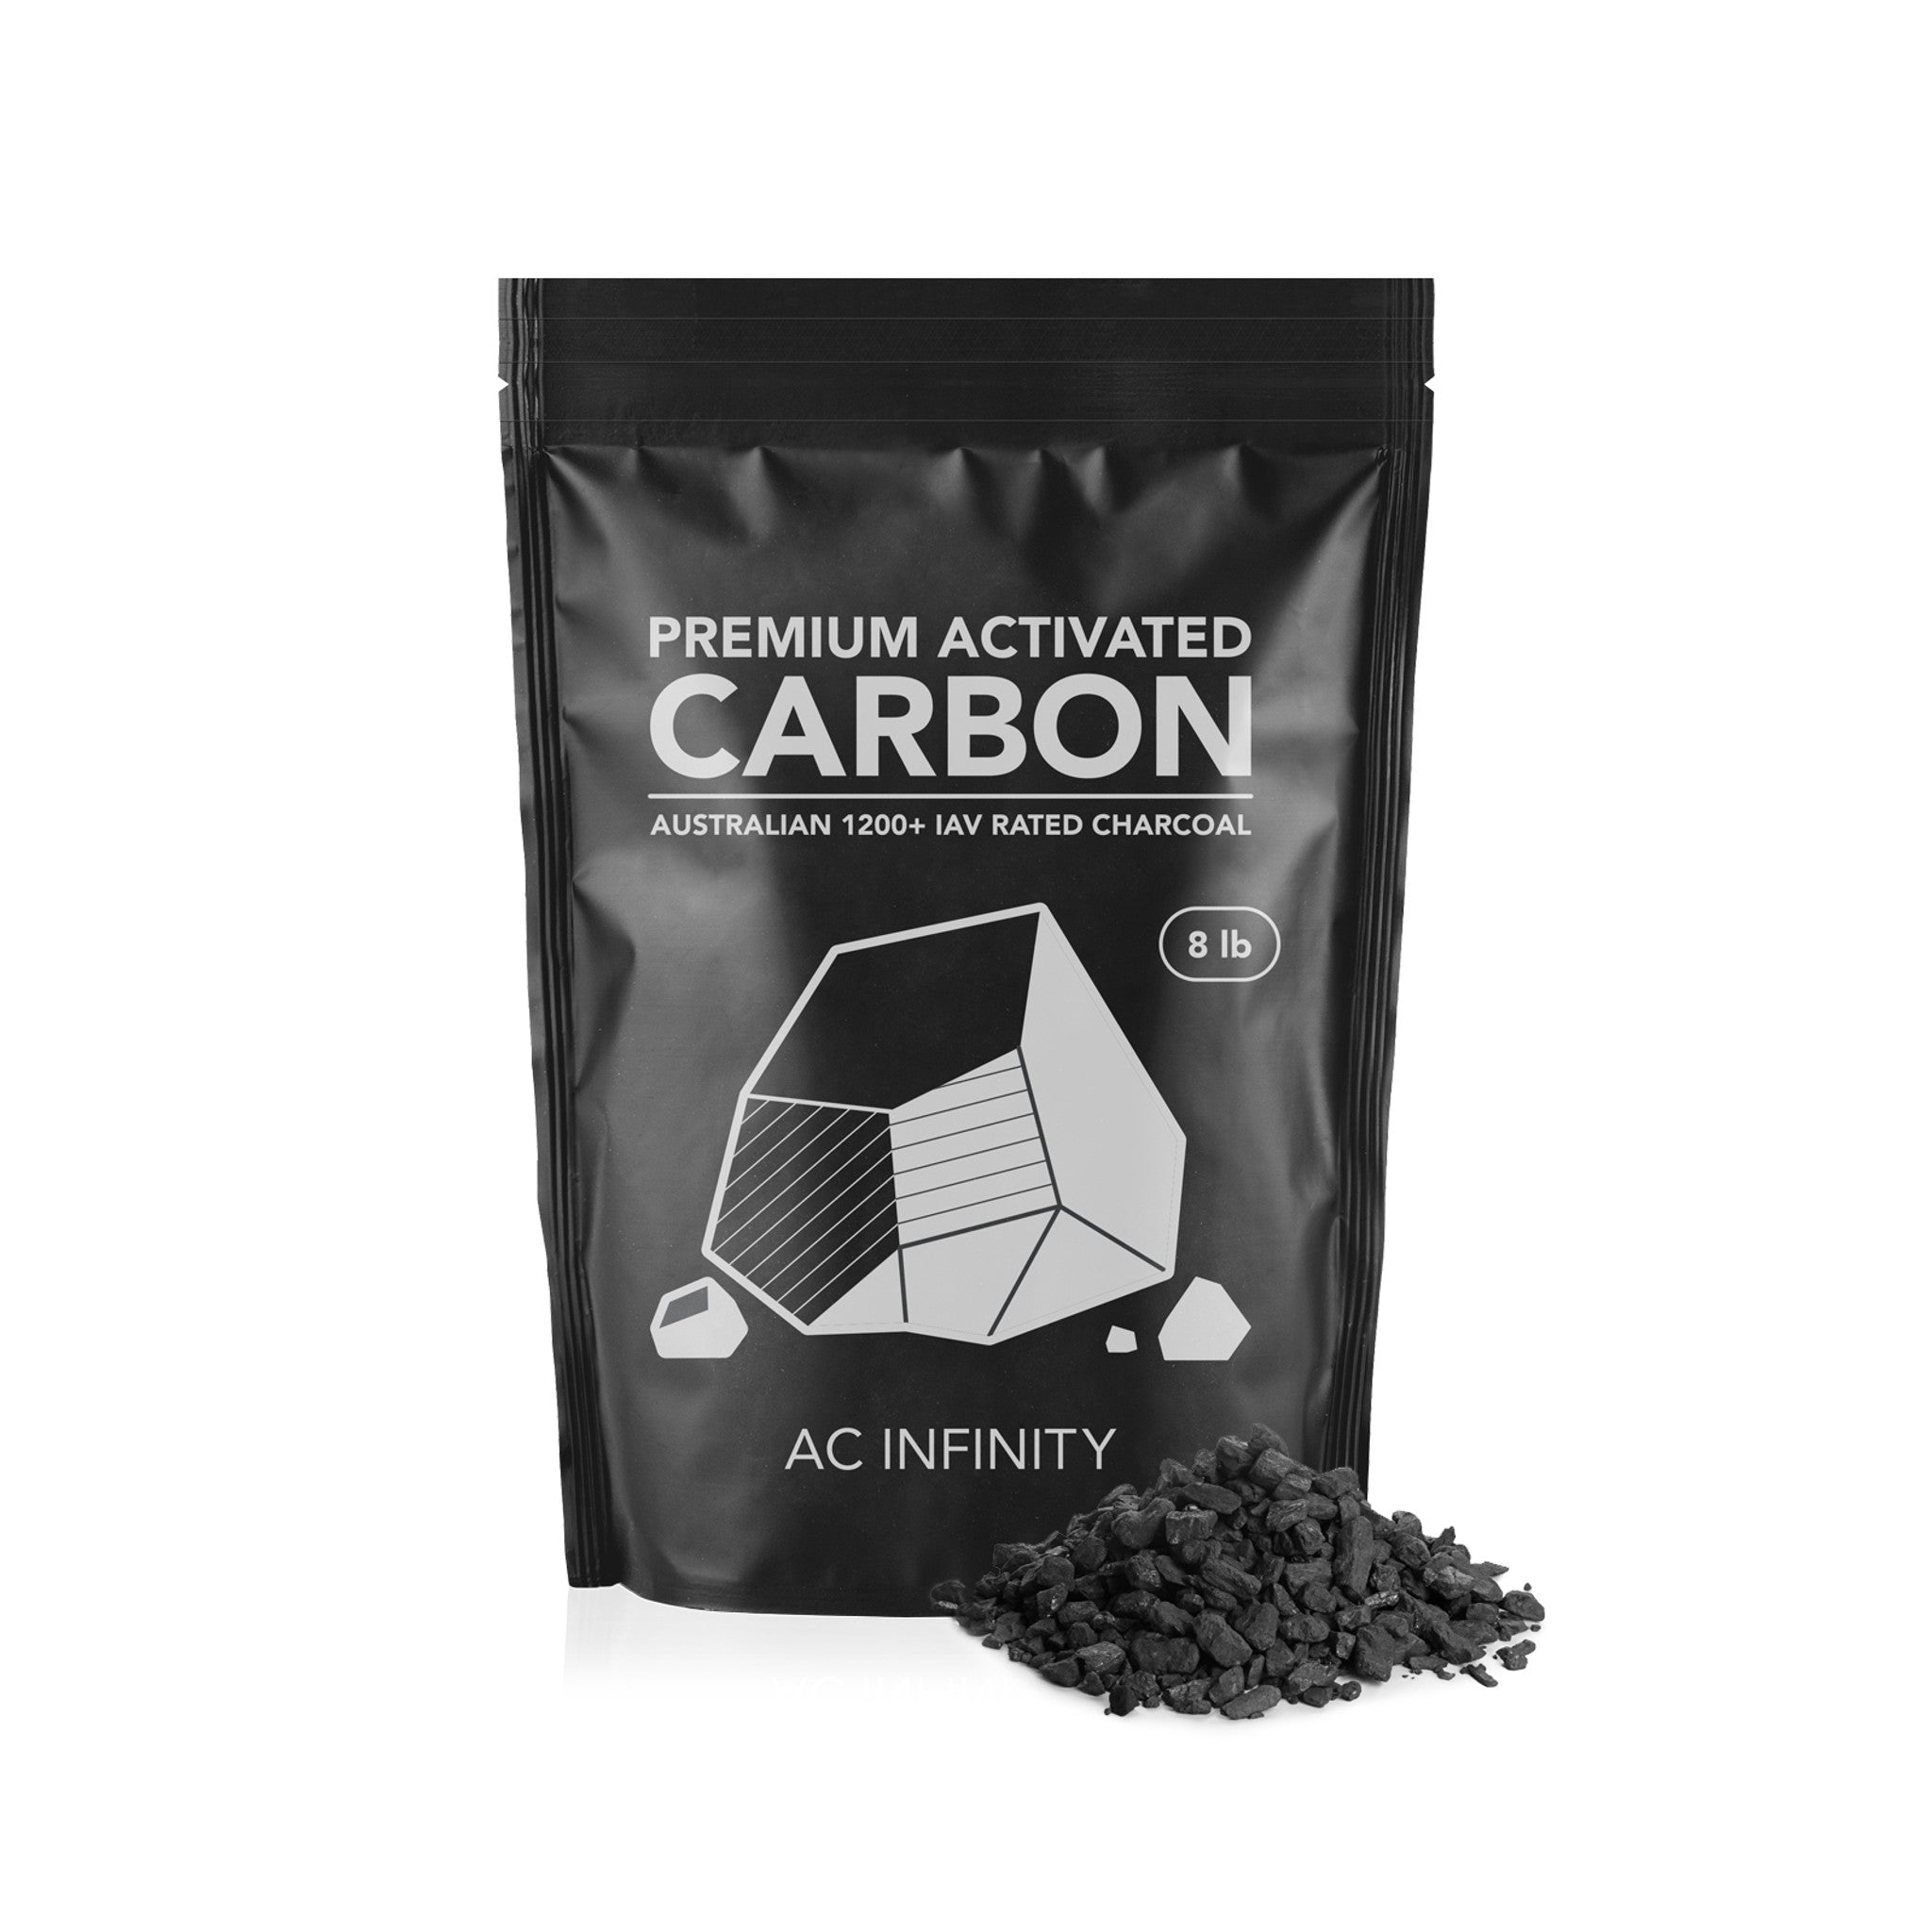 Product Image:AC INFINITY ACTIVATED CARBON REFILL, 1200+ IAV AUSTRALIAN CHARCOAL